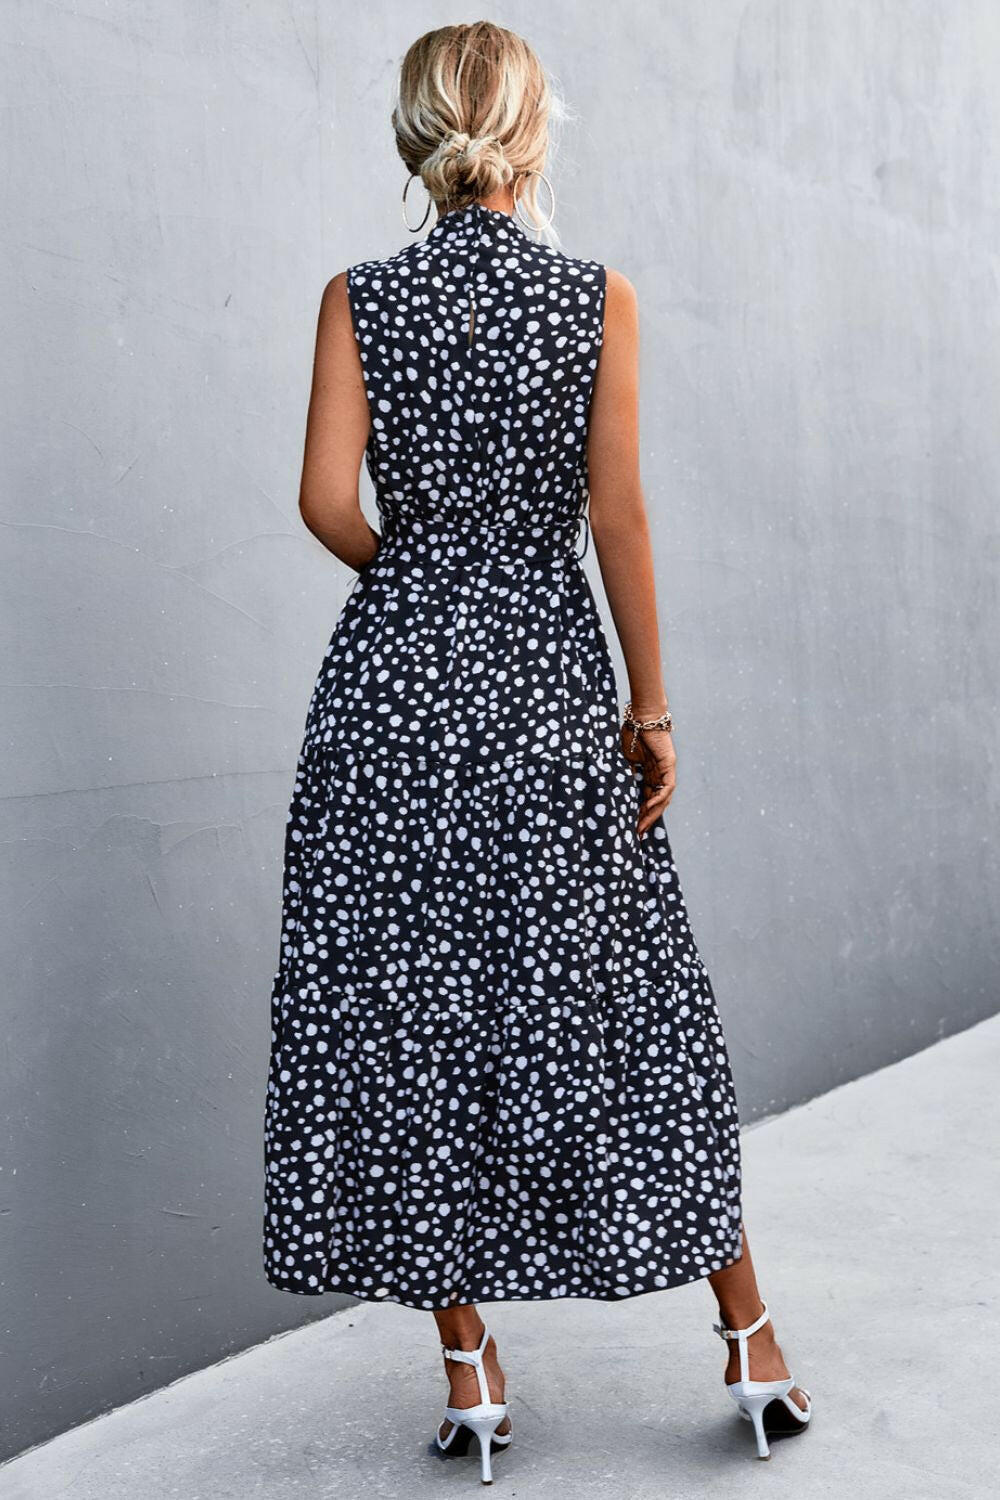 Printed Mock Neck Sleeveless Belted Tiered Dress.